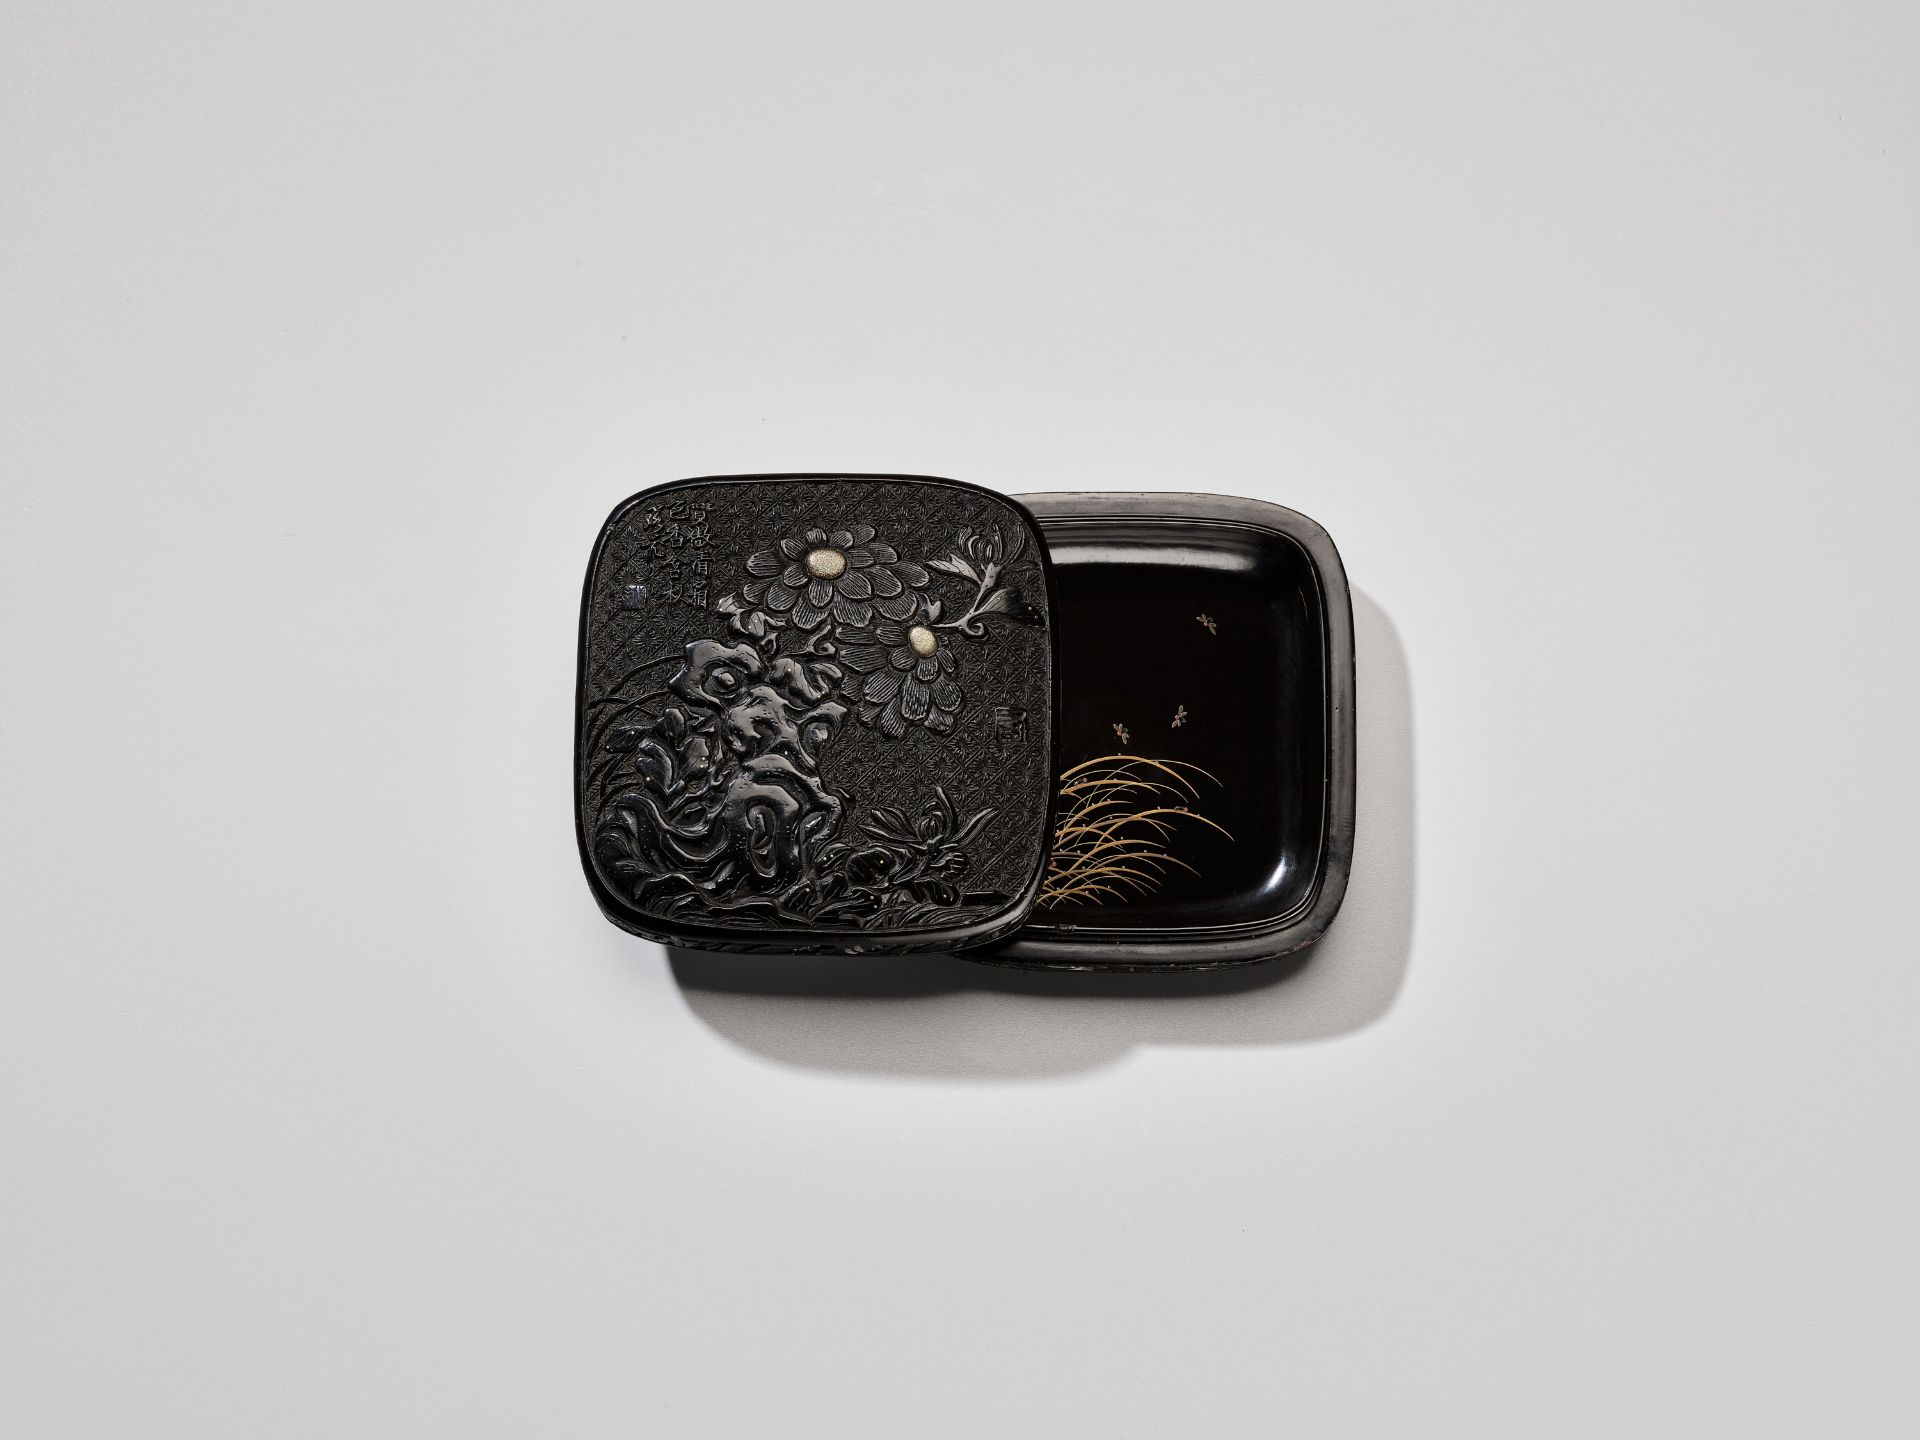 A RARE TSUIKOKU (CARVED BLACK LACQUER) KOGO (INCENSE BOX) AND COVER WITH CHRYSANTHEMUMS AND POEM - Image 3 of 10